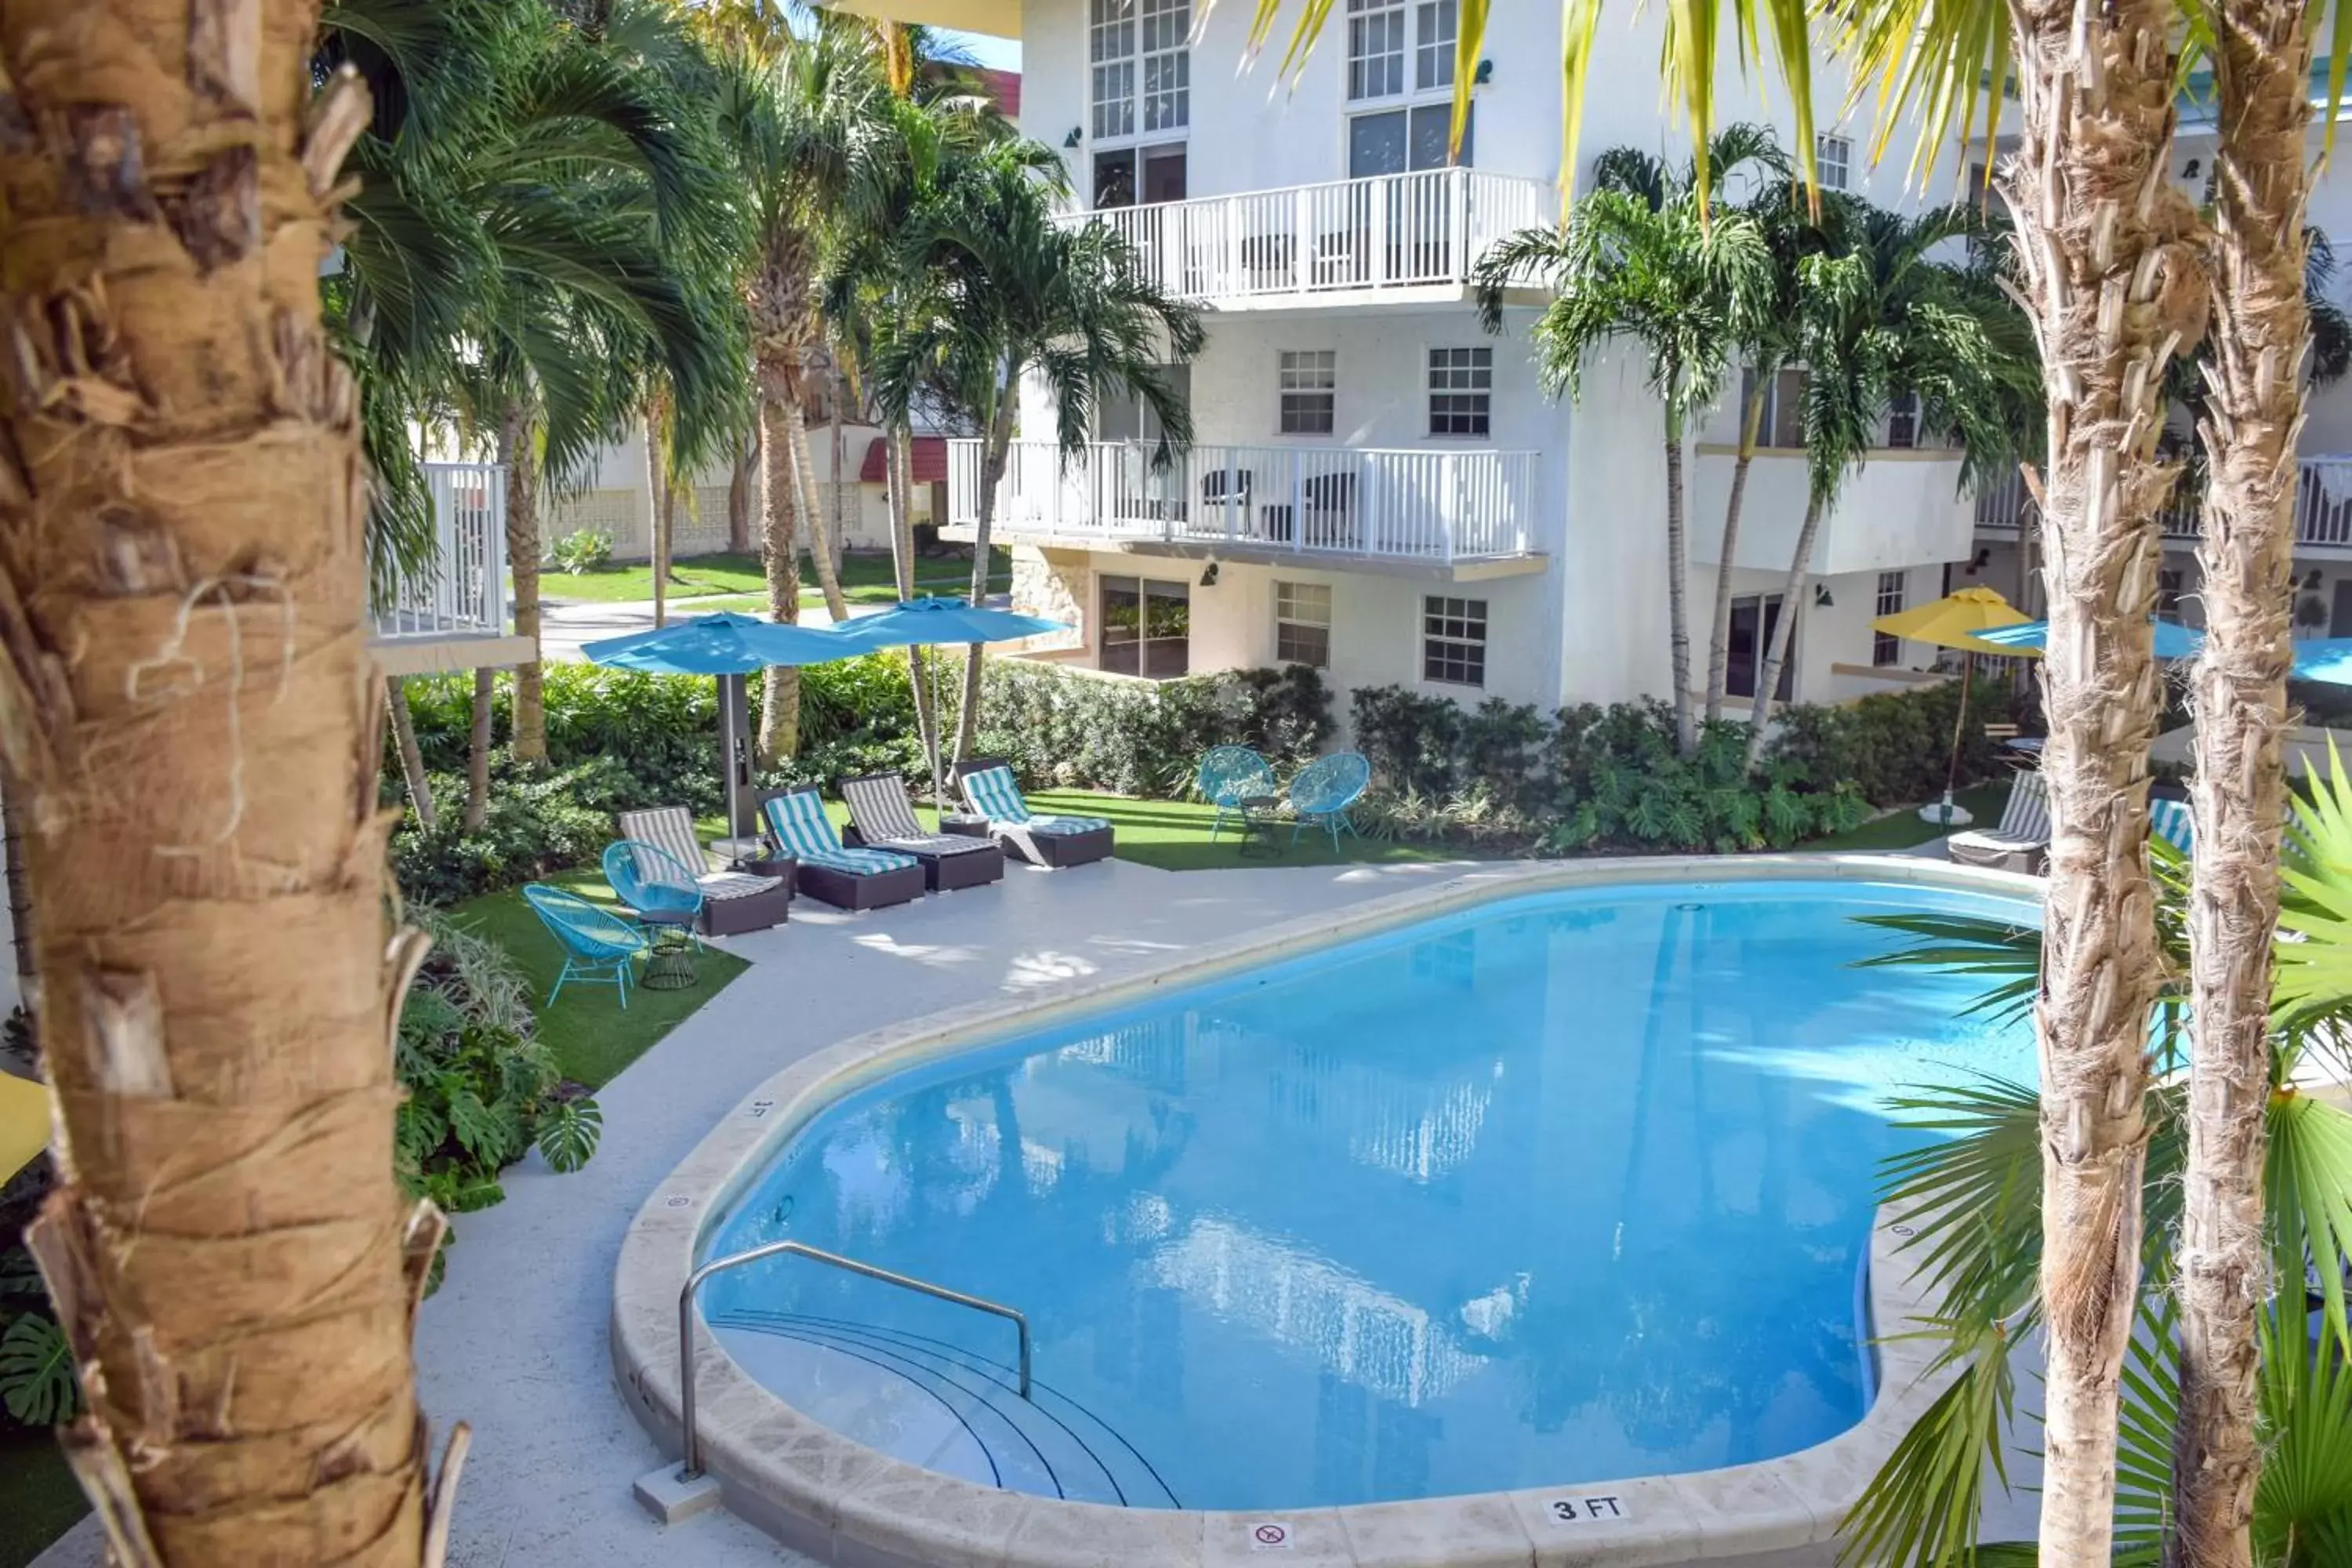 Patio, Swimming Pool in Coral Reef at Key Biscayne